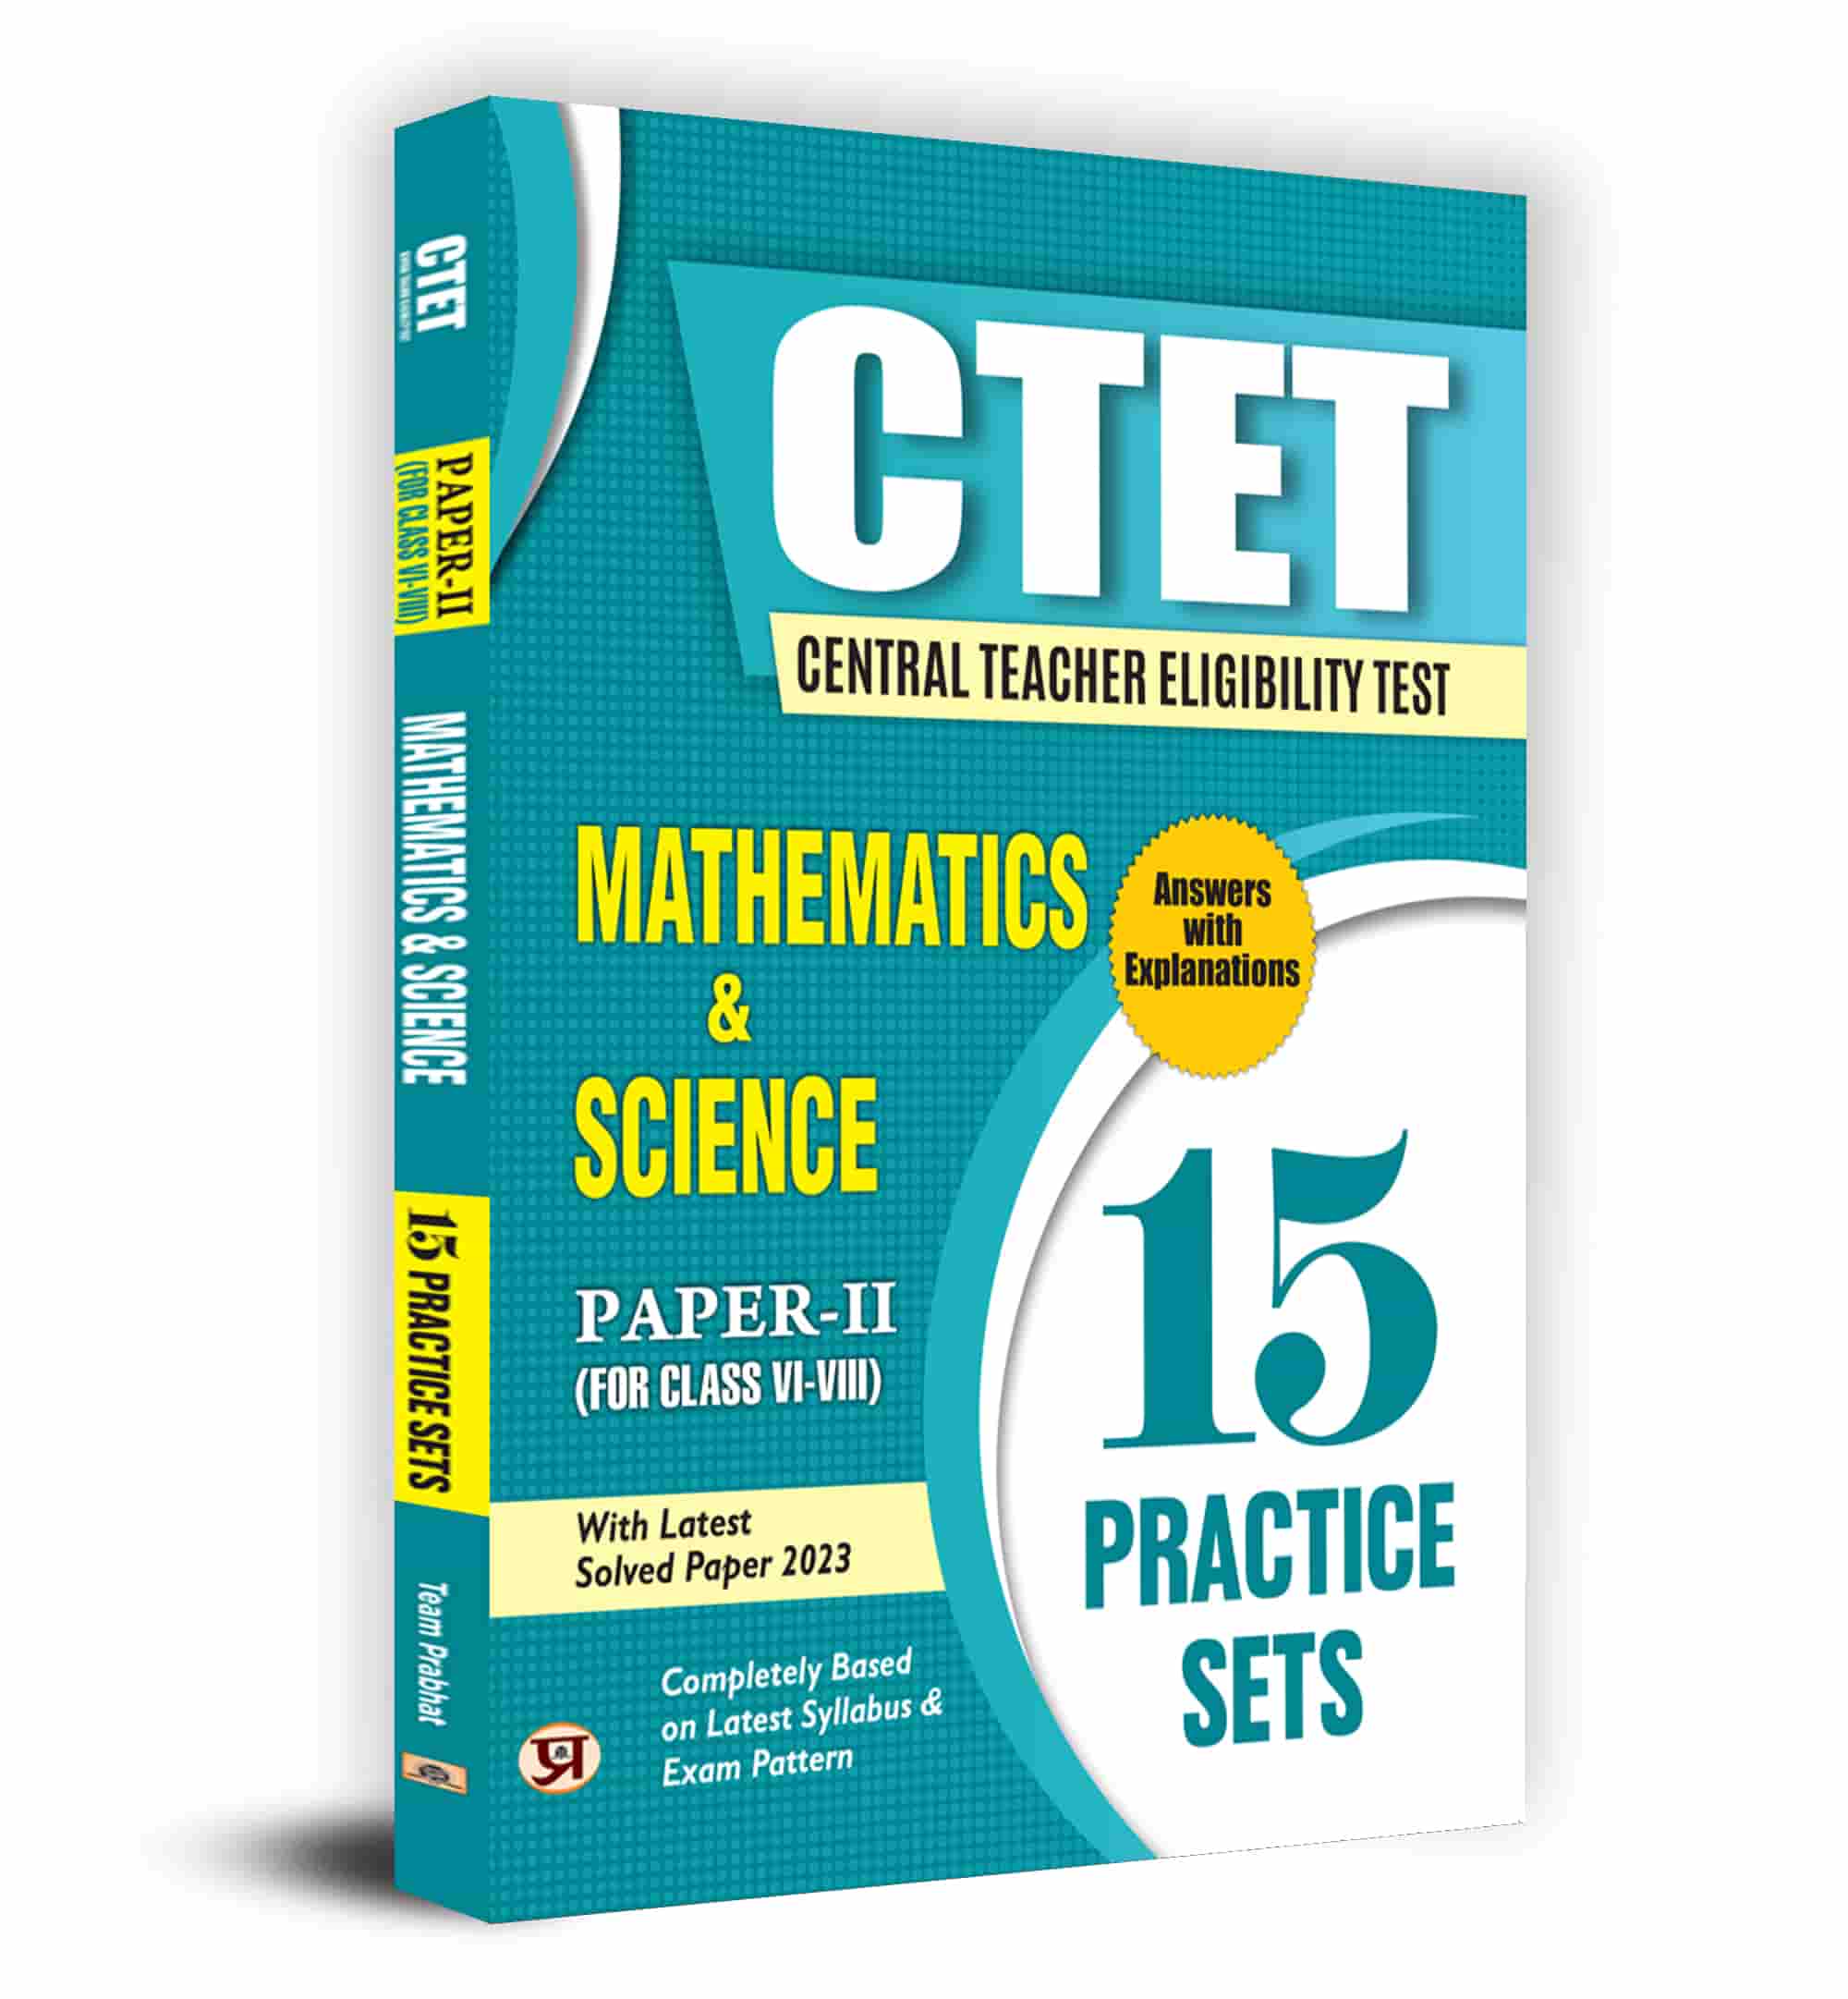 CTET Central Teacher Eligibility Test Paper-2 (Class Vi-Viii) Mathematics And Science 15 Practice Sets with Latest Solved Papers (English)